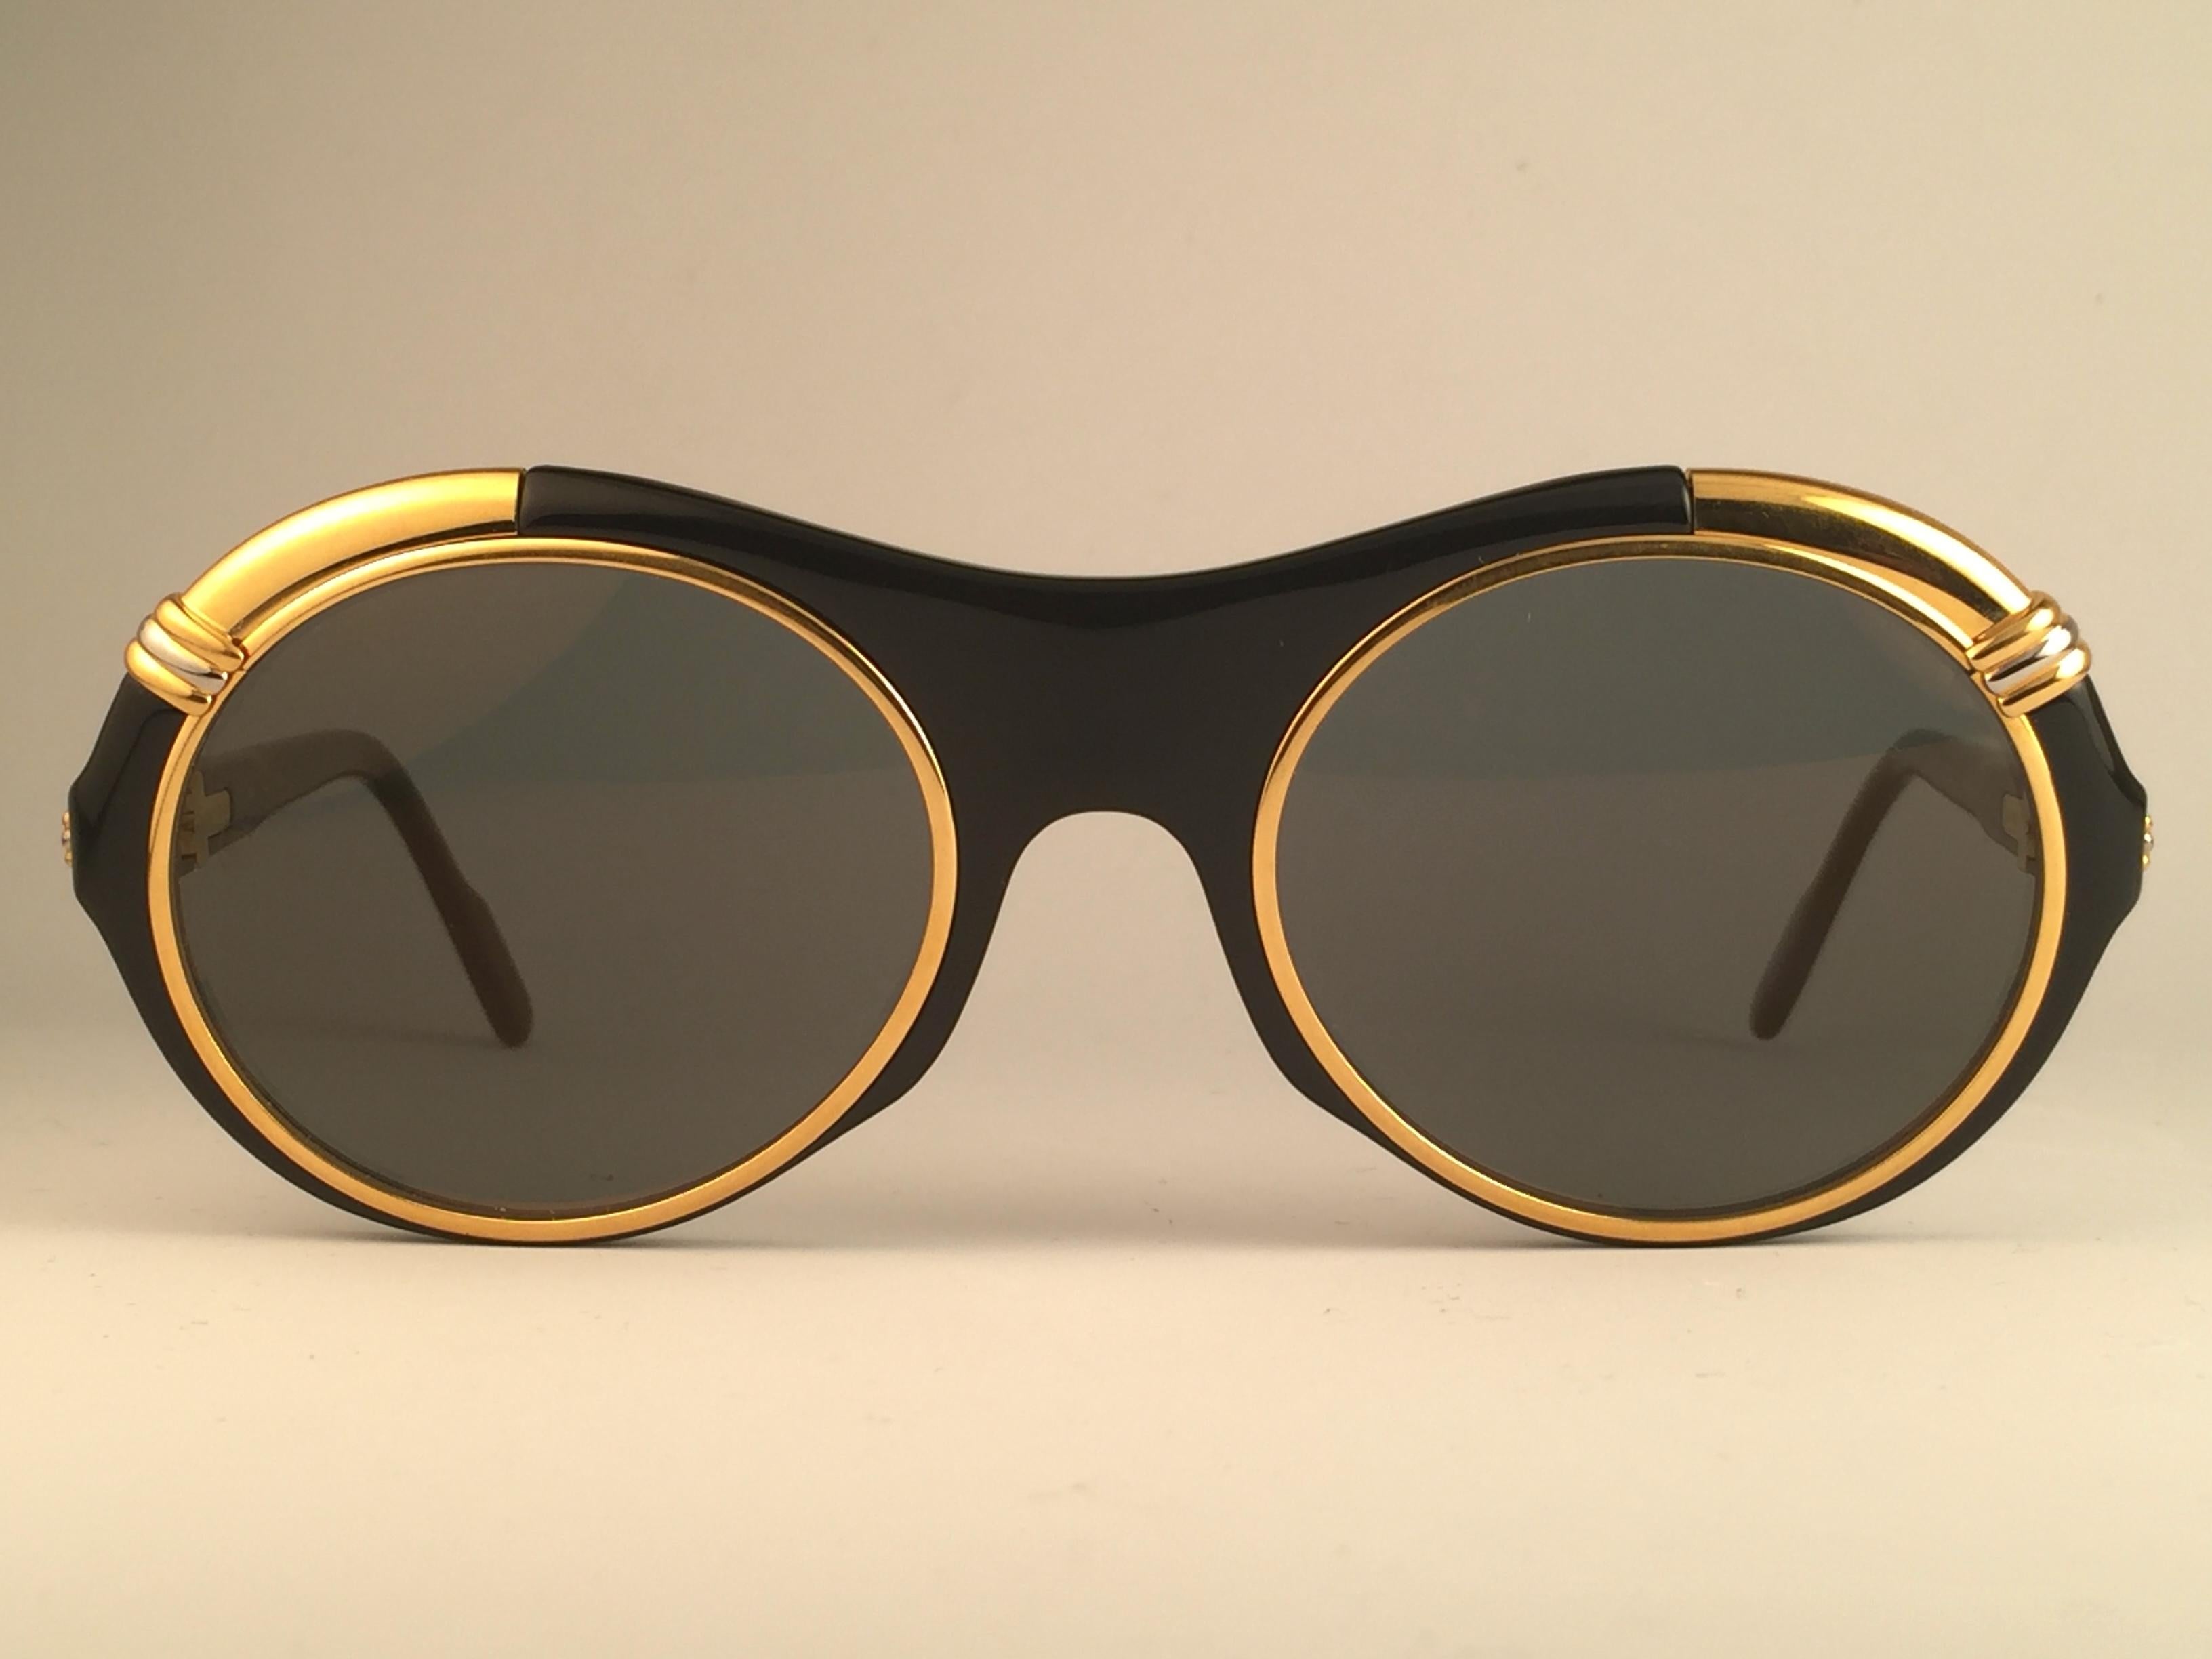 1991 Original Cartier Diabolo Art Deco Sunglasses with spotless amazing brown gold mirrored (uv protection). 
Frame has the famous real gold and white gold accents in the middle and on the sides.
All hallmarks. Cartier gold signs on the earpaddles.